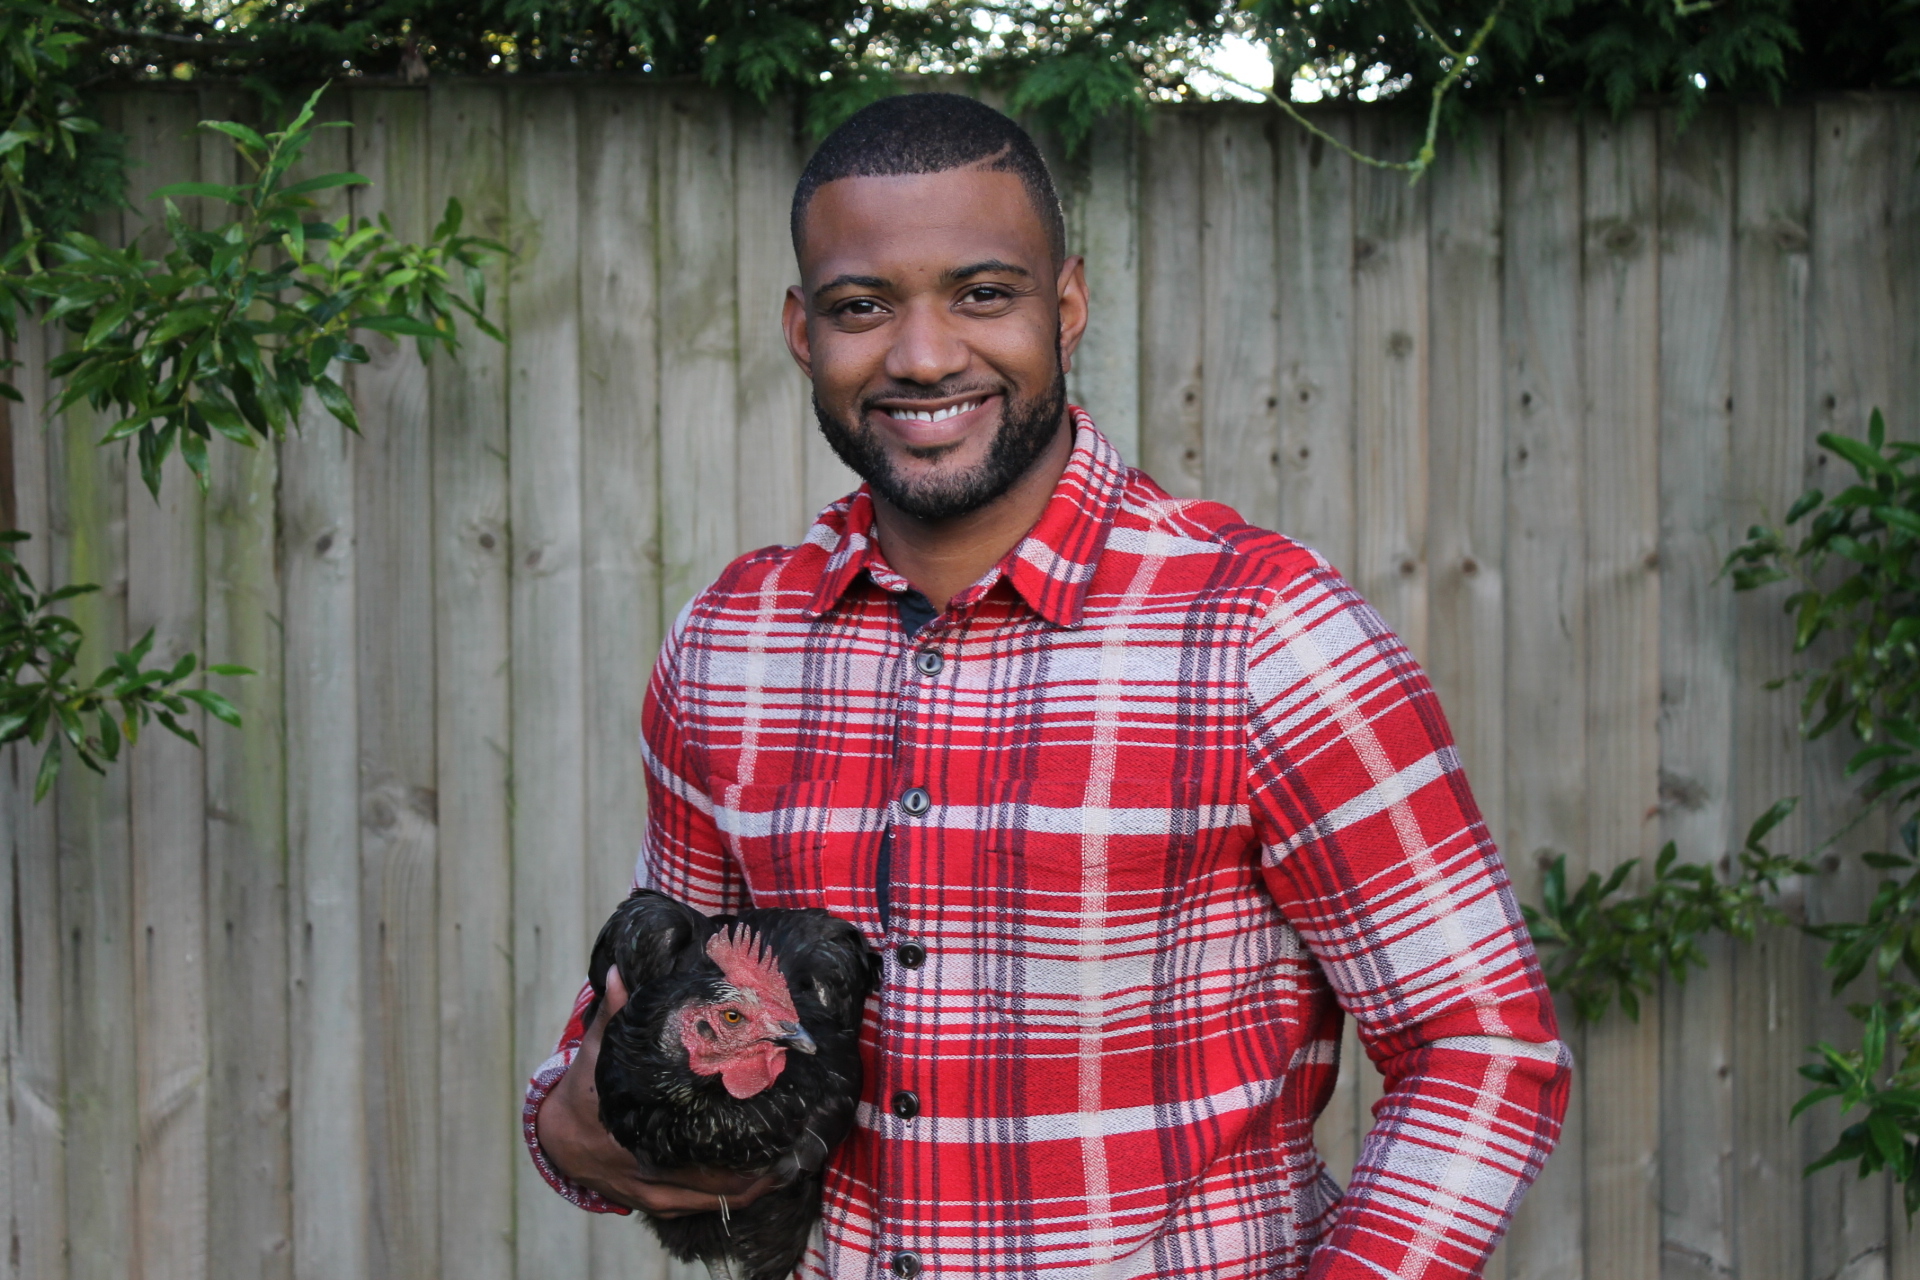 JB Gill will be one of the main attractions at this year's Dundee Flower and Food Festival.